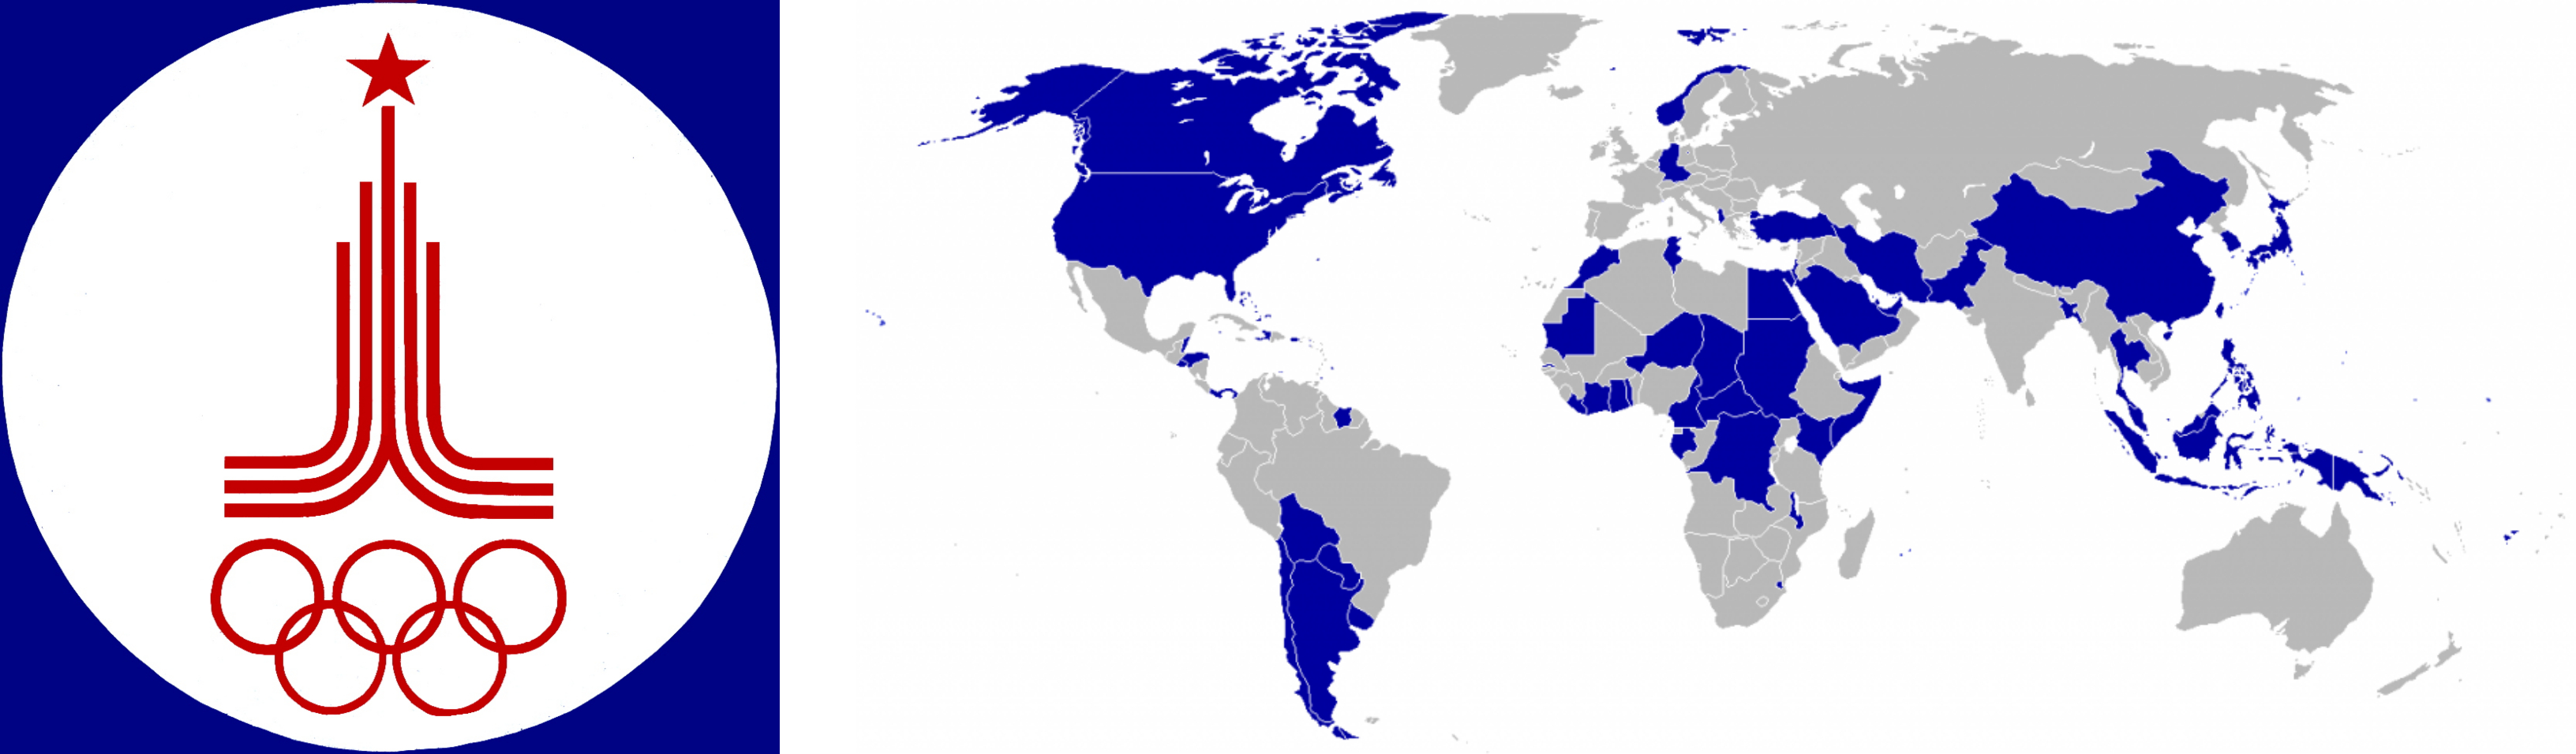 On the left, logo of the 1980 Olympics. On the right, a map of countries boycotting the games in blue.